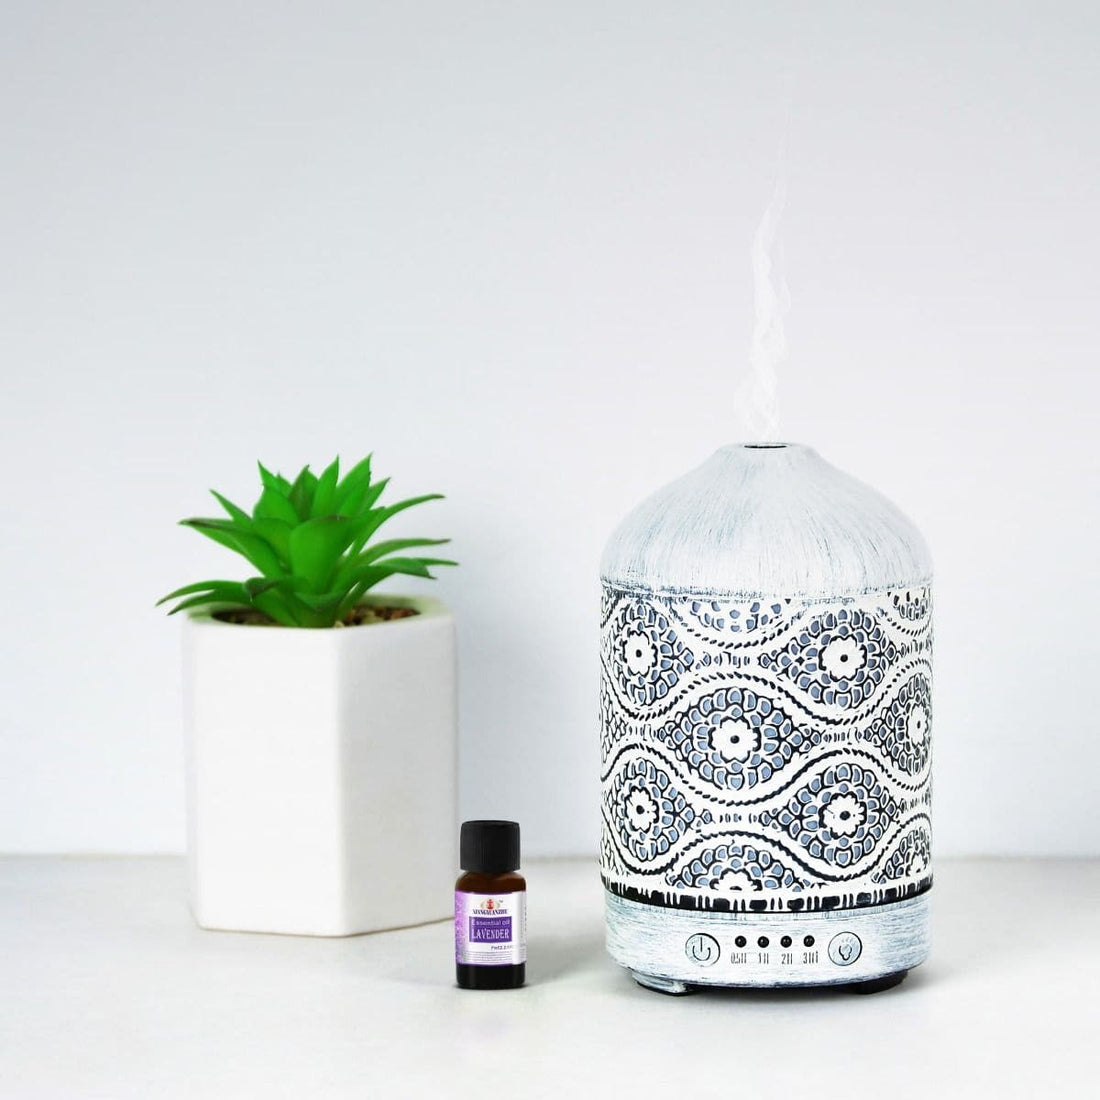 activiva 100ml Metal Essential Oil and Aroma Diffuser-Vintage White-Appliances &gt; Aroma Diffusers &amp; Humidifiers-PEROZ Accessories